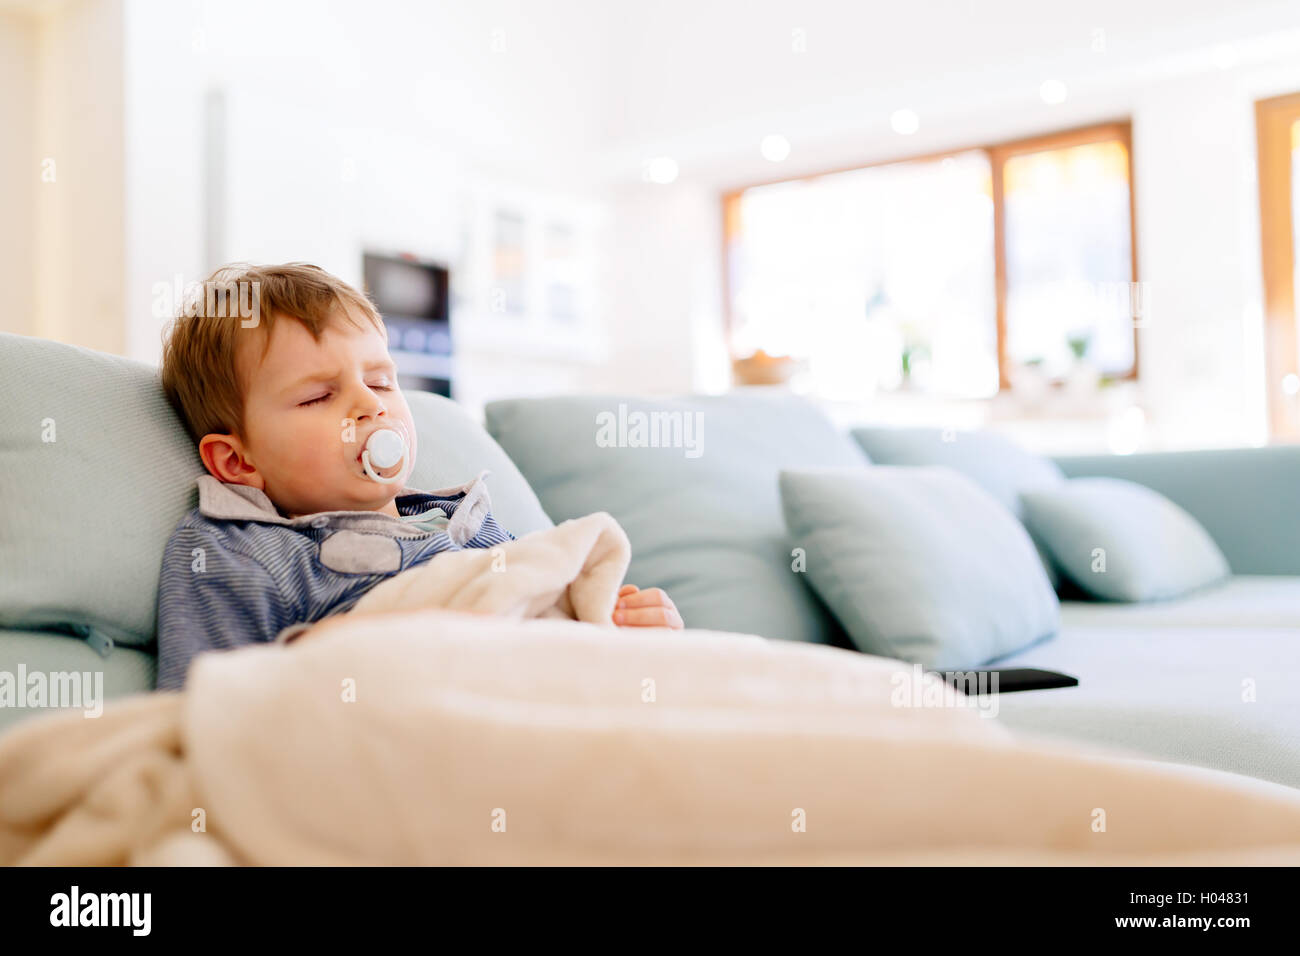 Sick child resting while wrapped in blanked Stock Photo